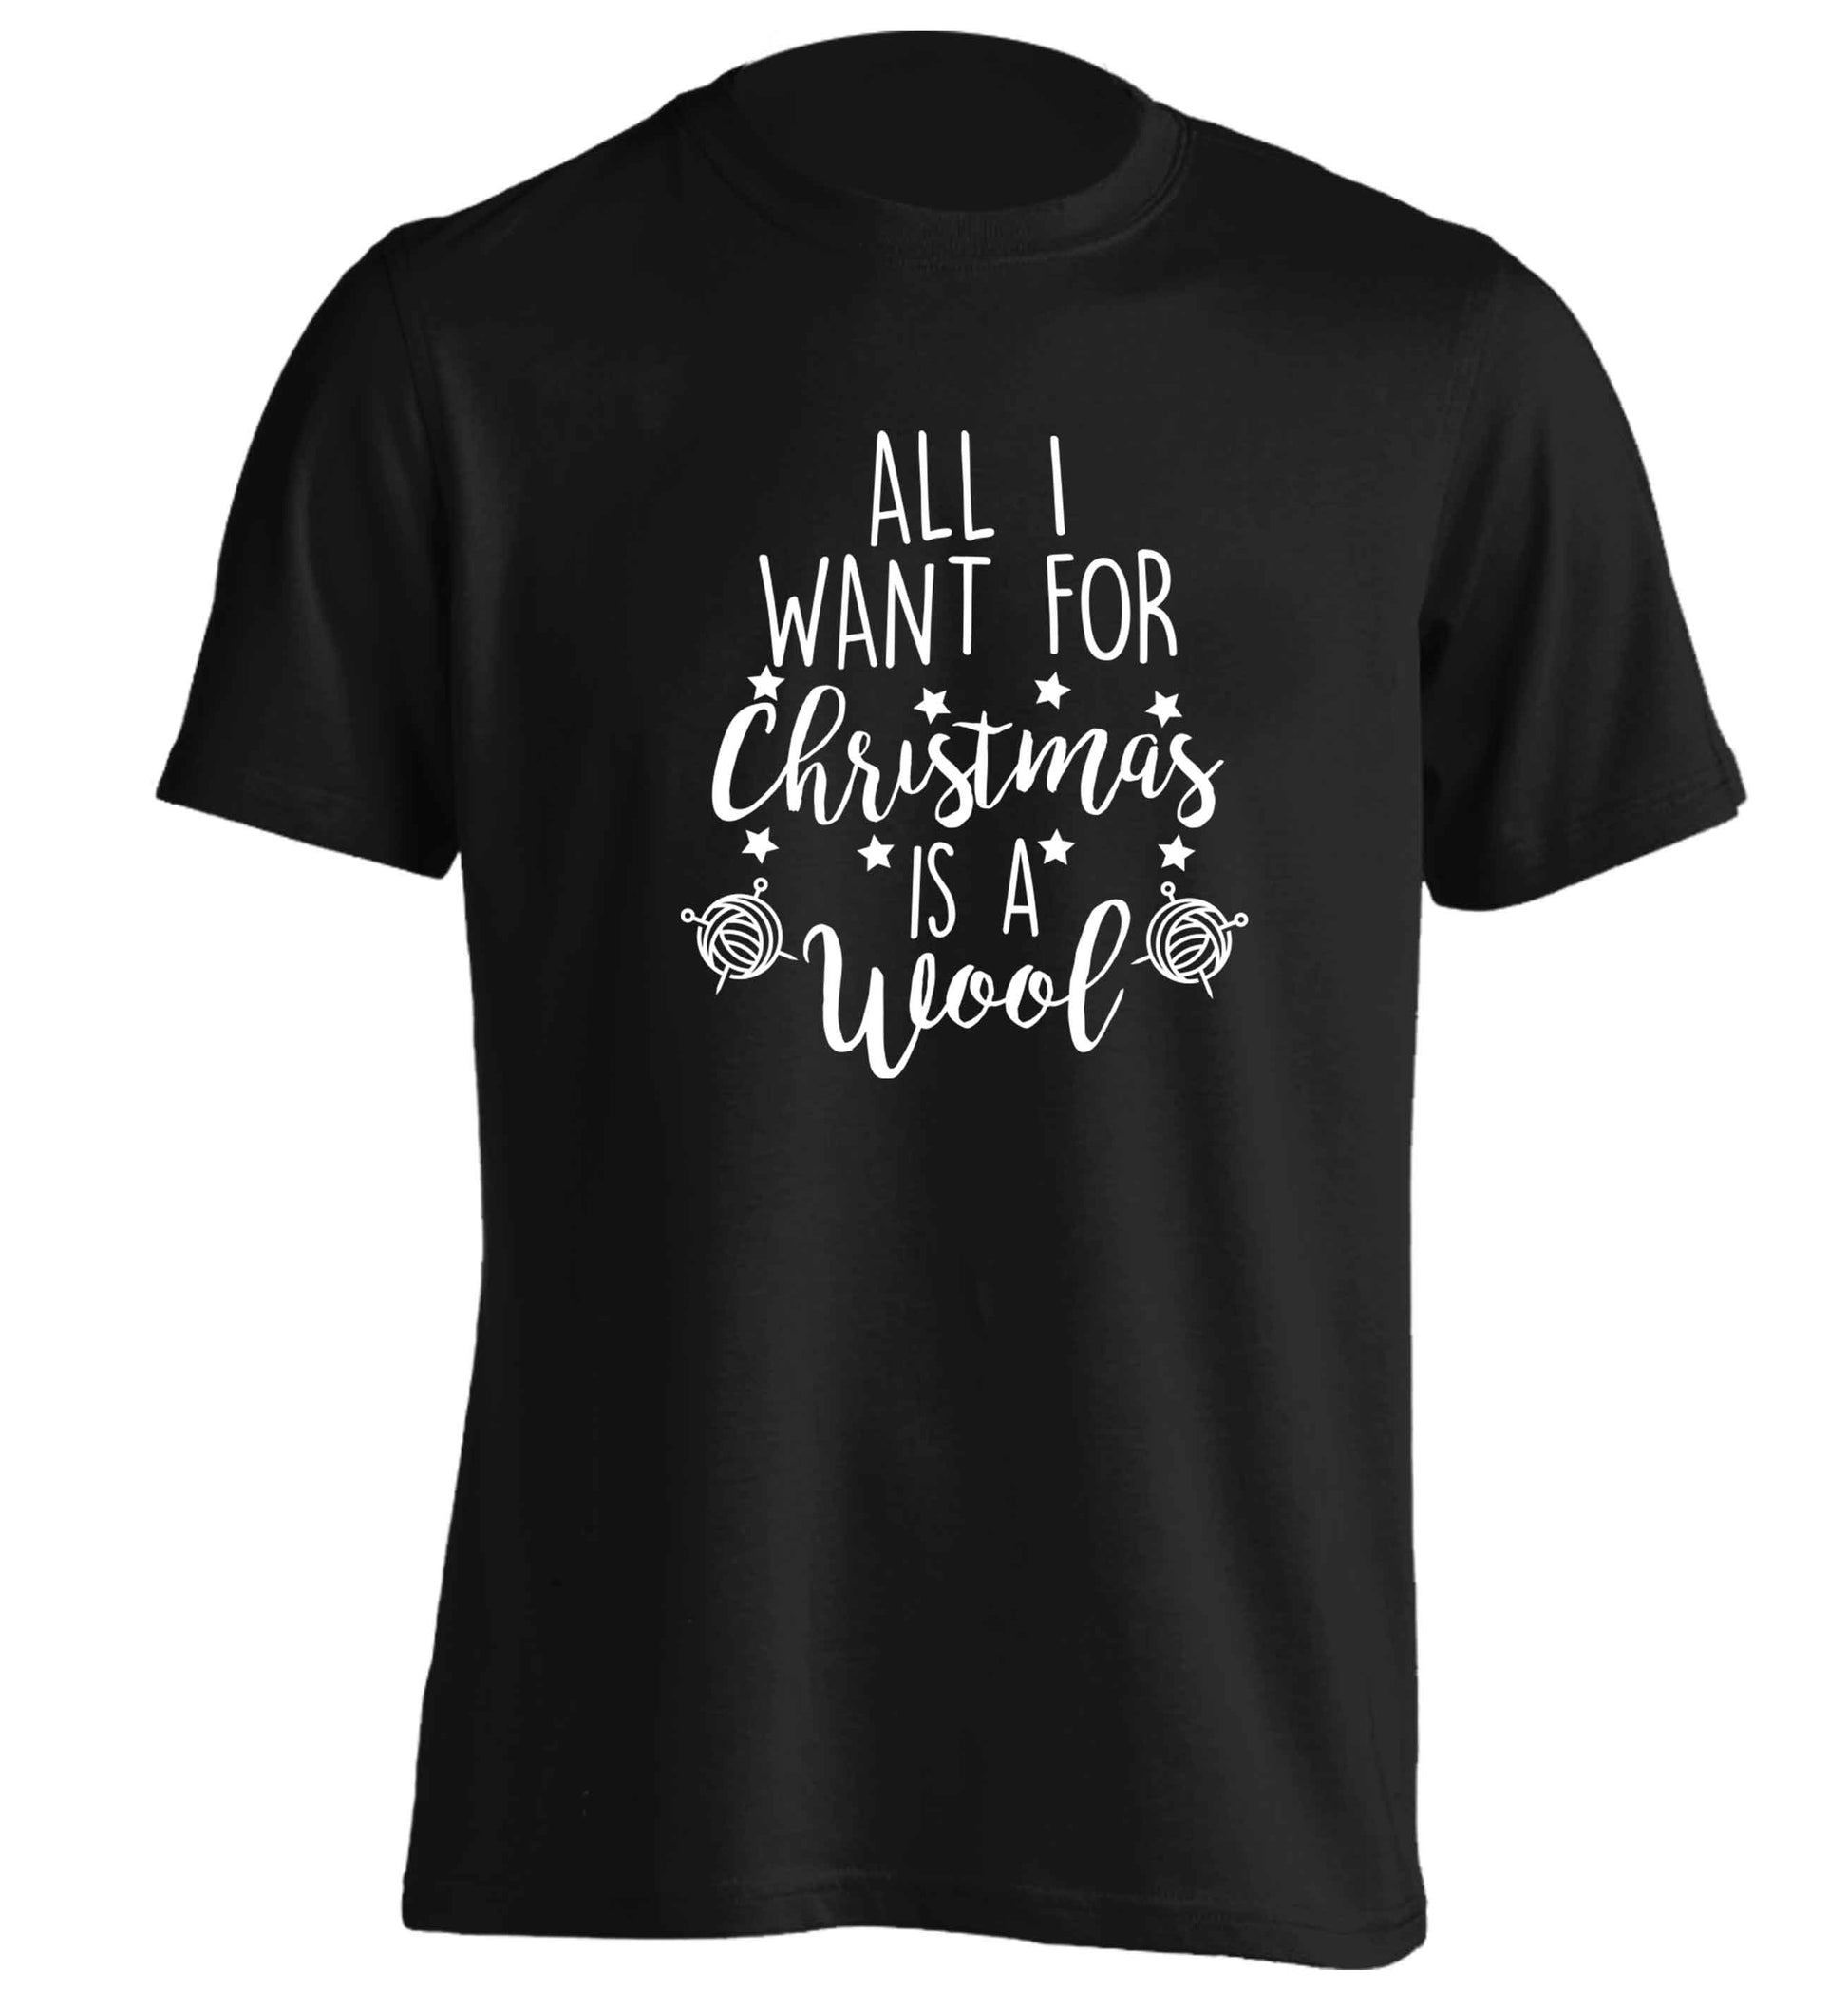 All I want for Christmas is wool! adults unisex black Tshirt 2XL